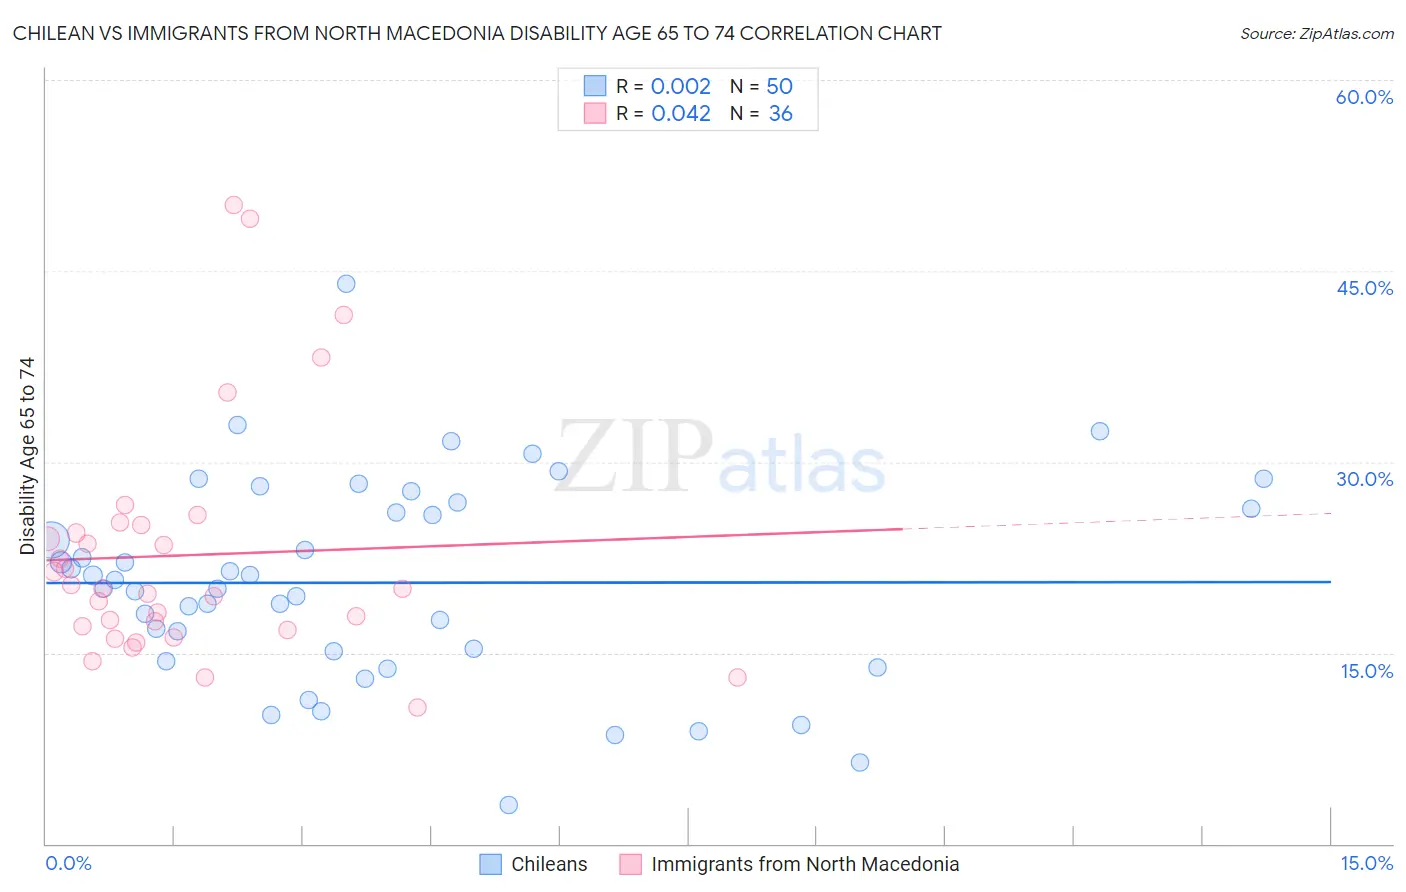 Chilean vs Immigrants from North Macedonia Disability Age 65 to 74